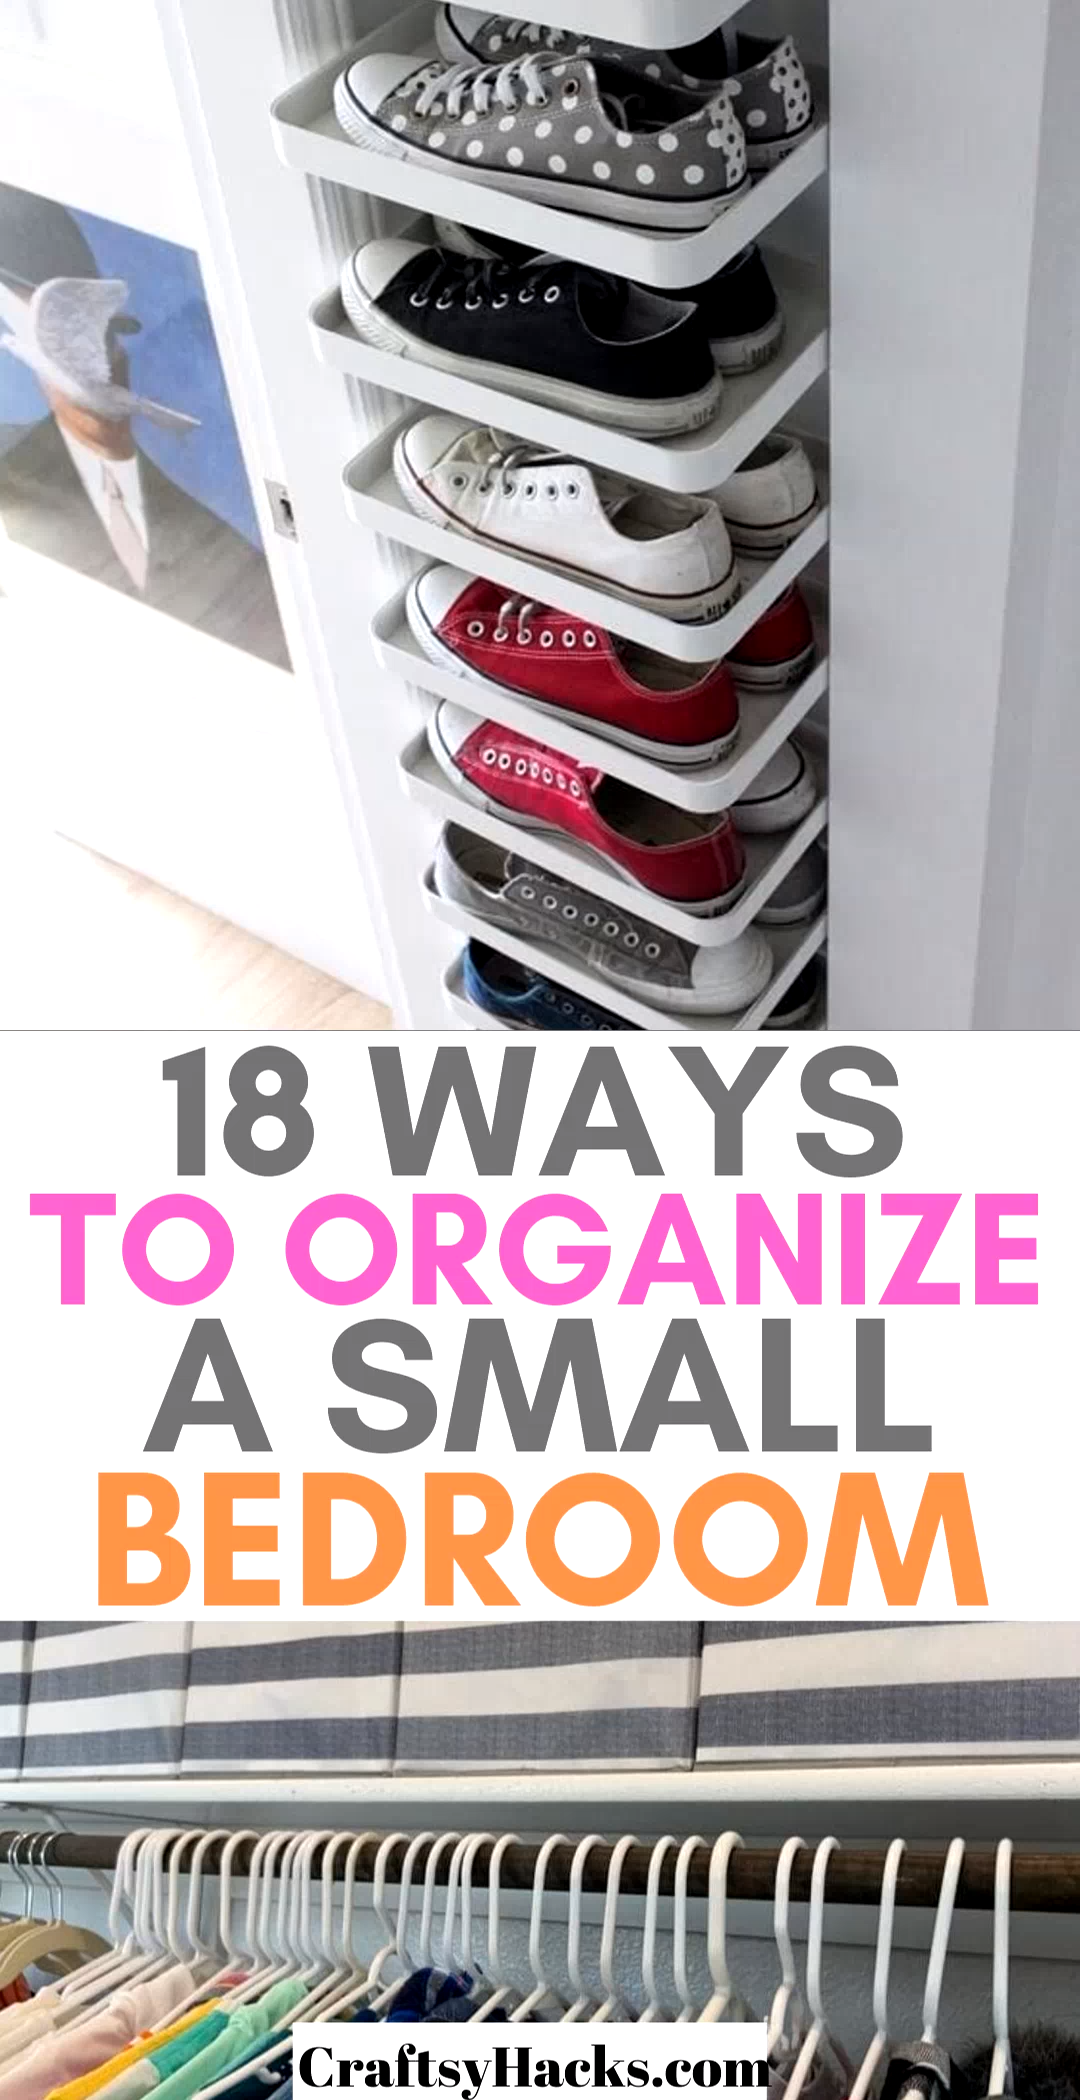 18 Ways to Organize a Small Bedroom - 18 Ways to Organize a Small Bedroom -   19 diy Organization bedroom ideas